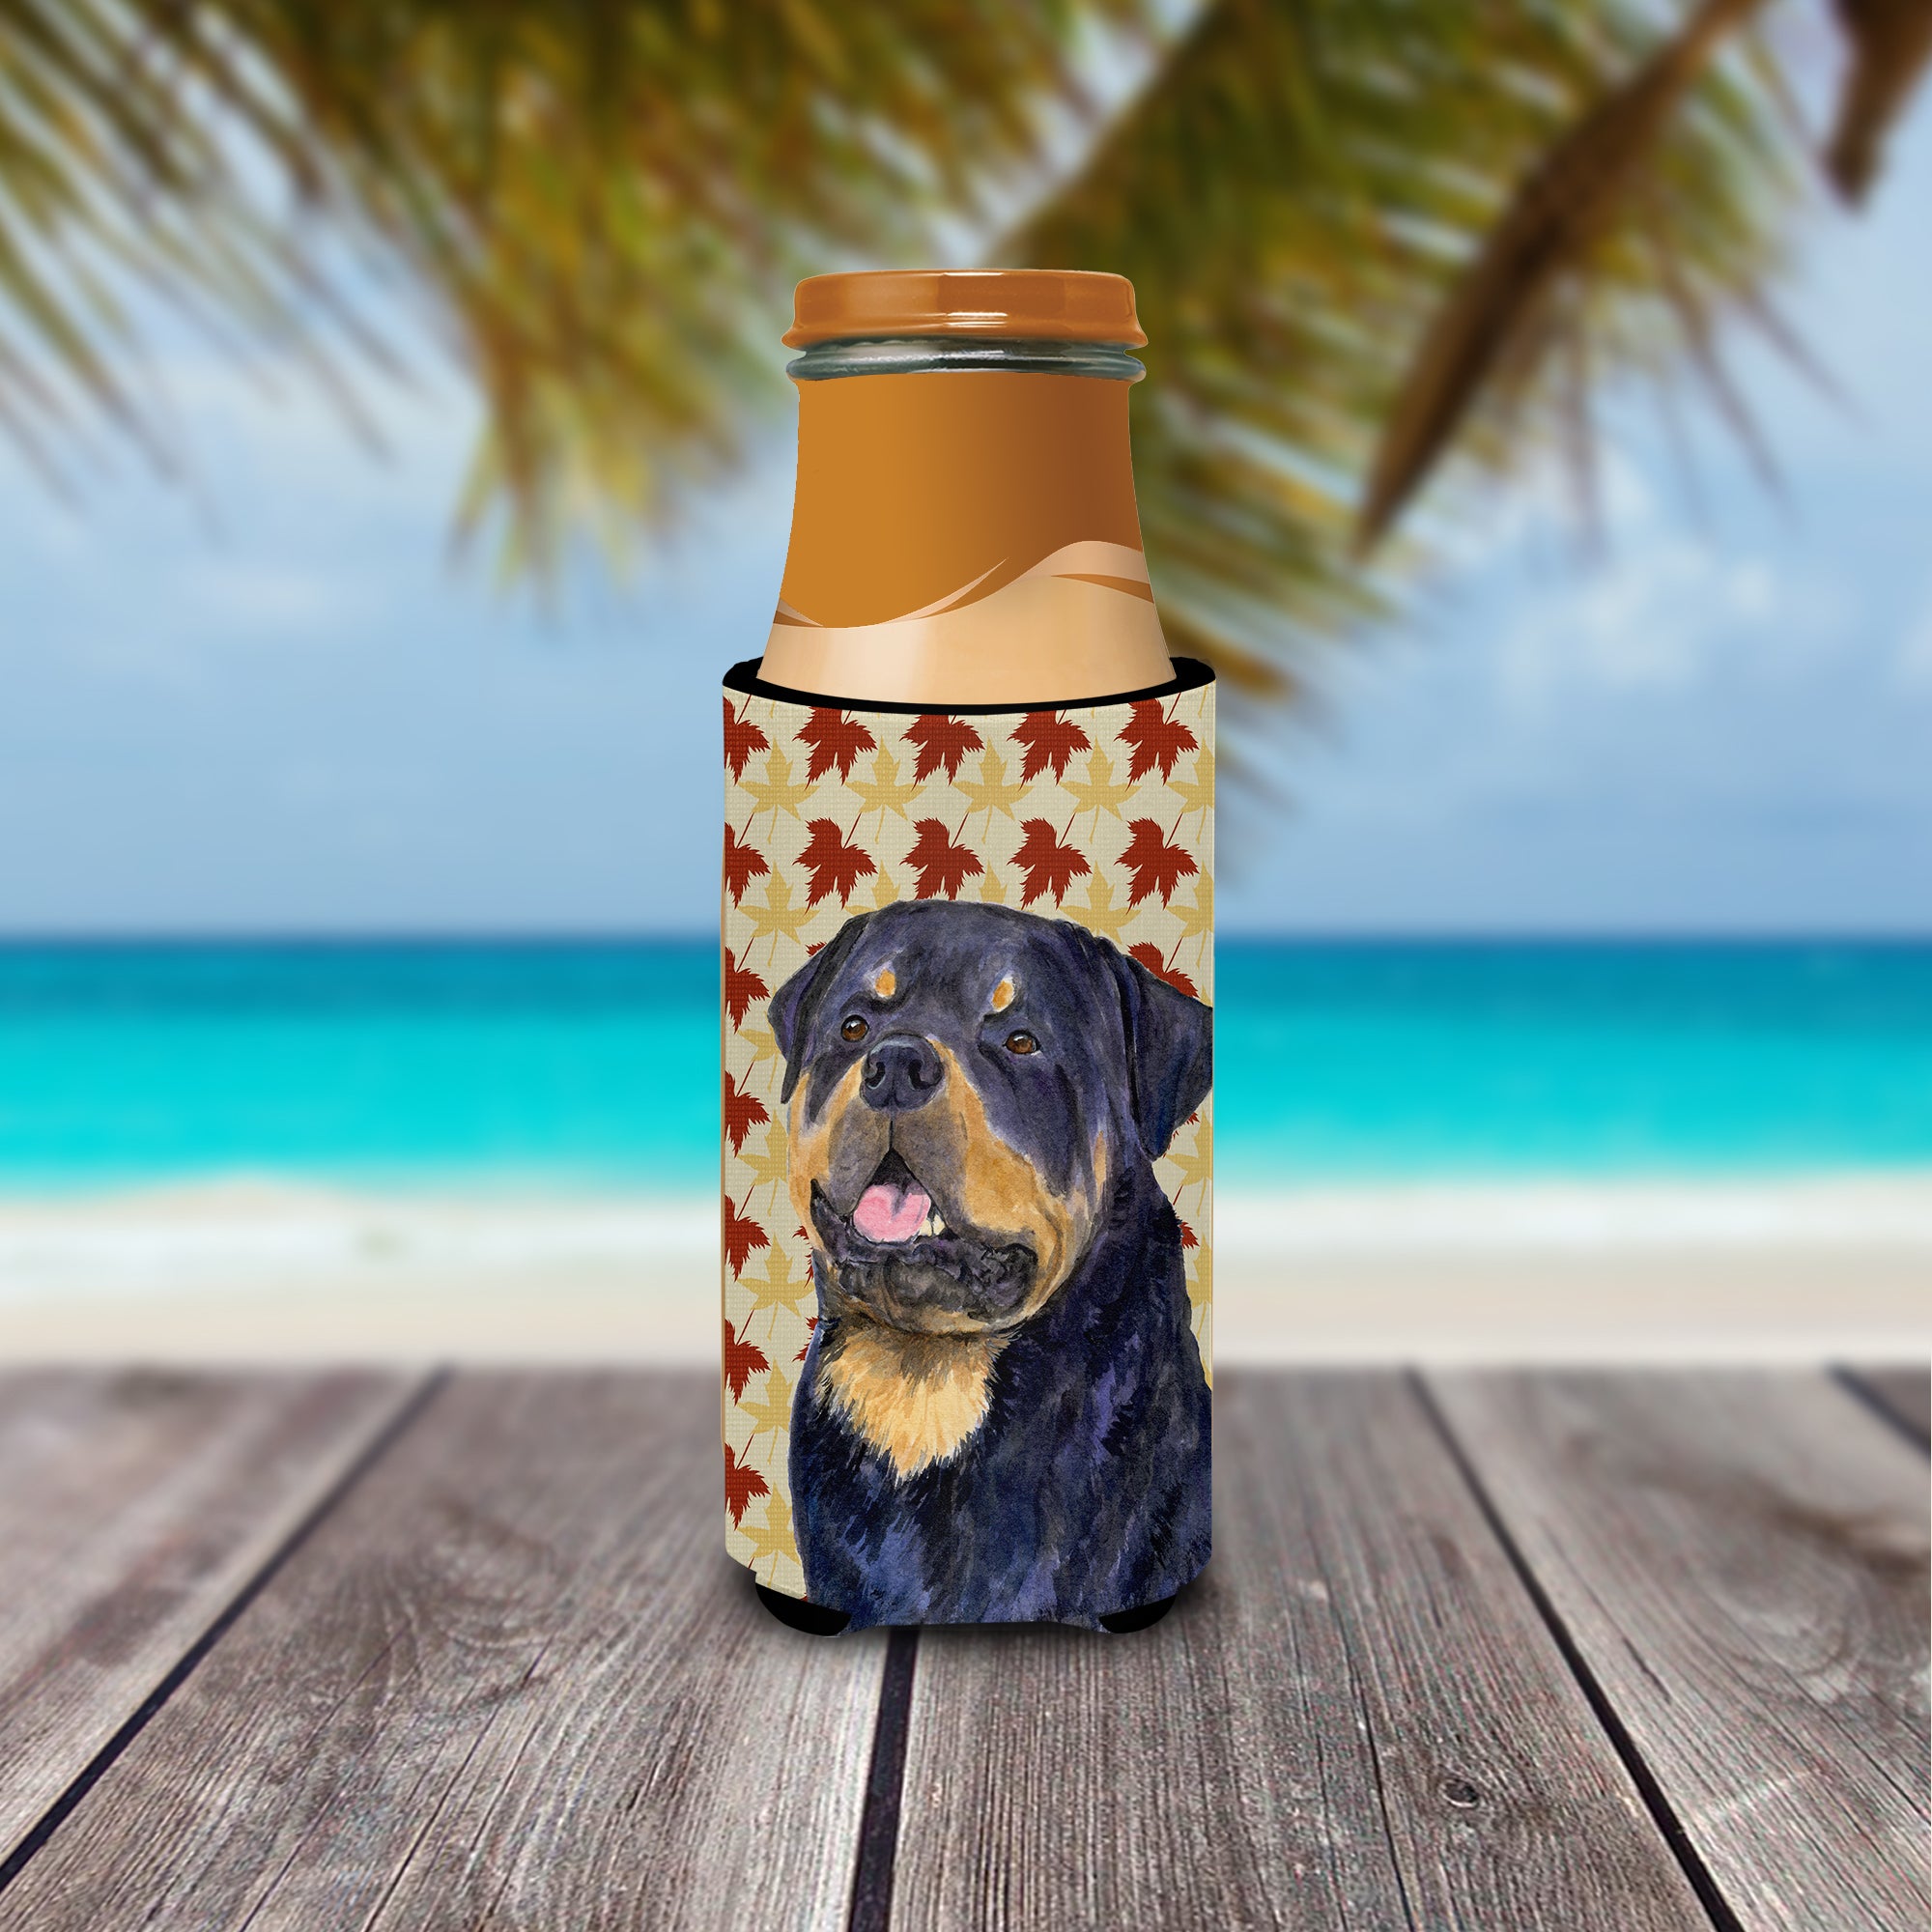 Rottweiler Fall Leaves Portrait Ultra Beverage Insulators for slim cans SS4332MUK